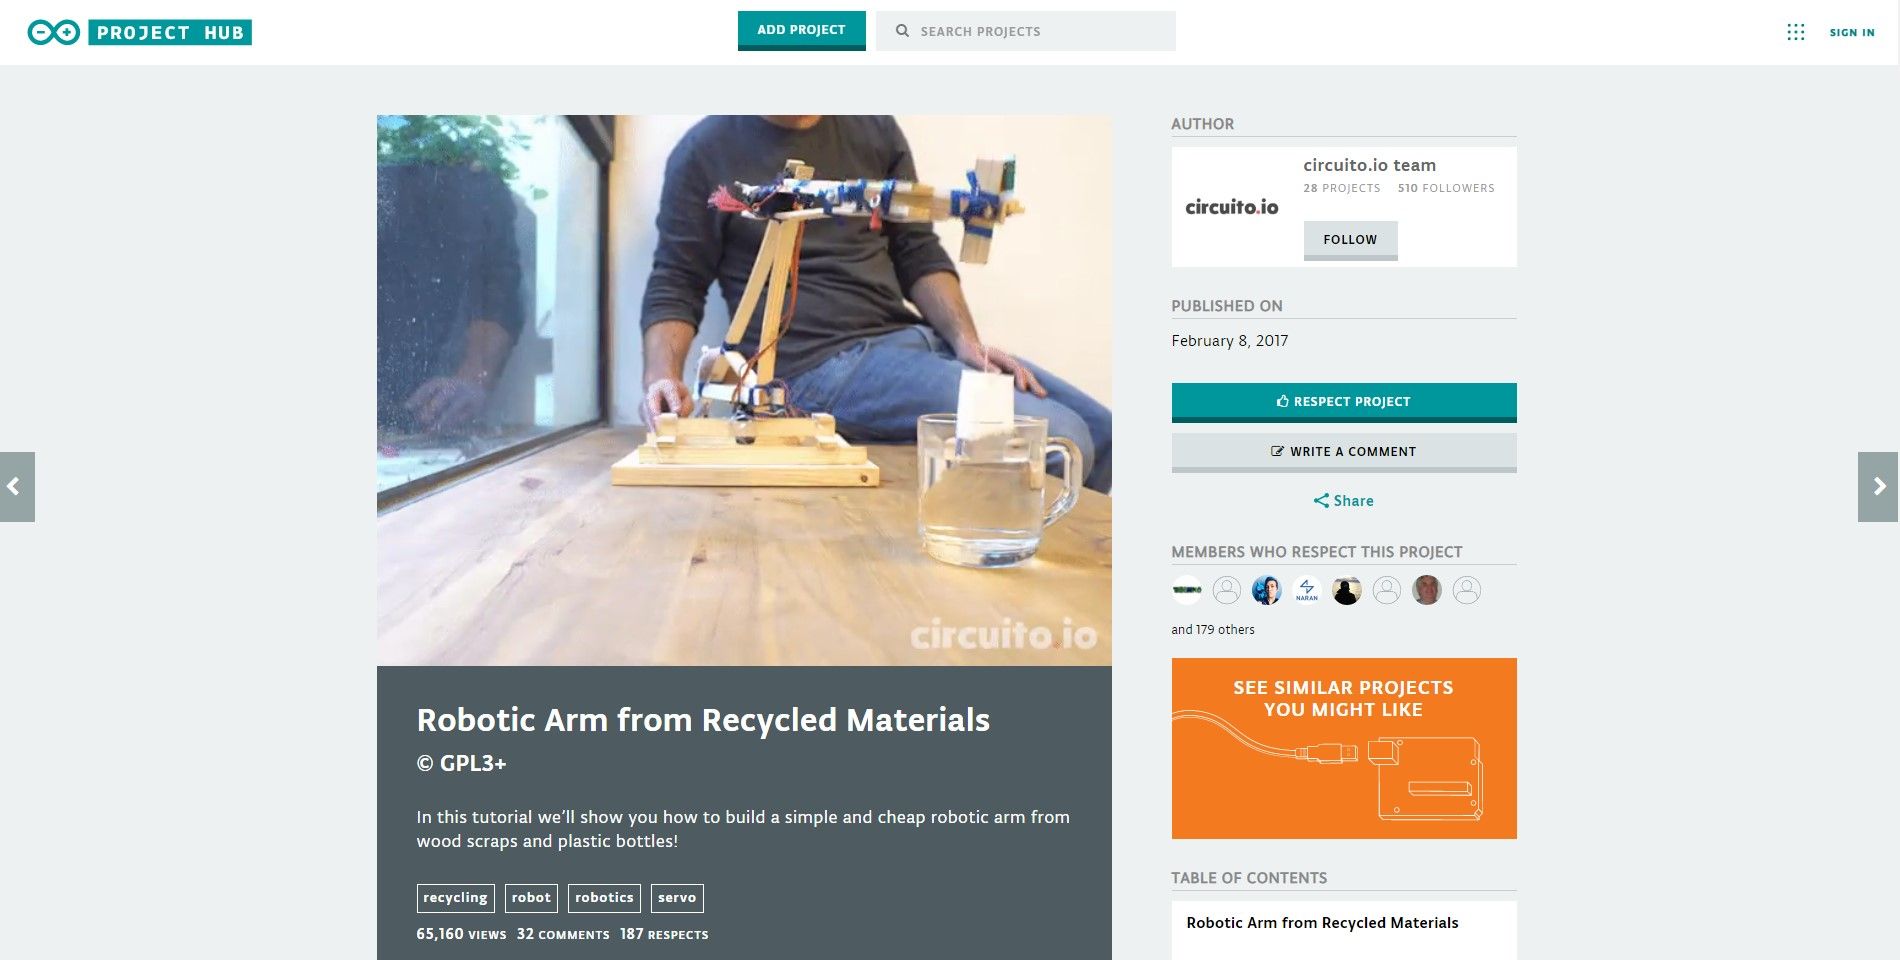 robotic-arm-from-recycled-materials-arduino-1